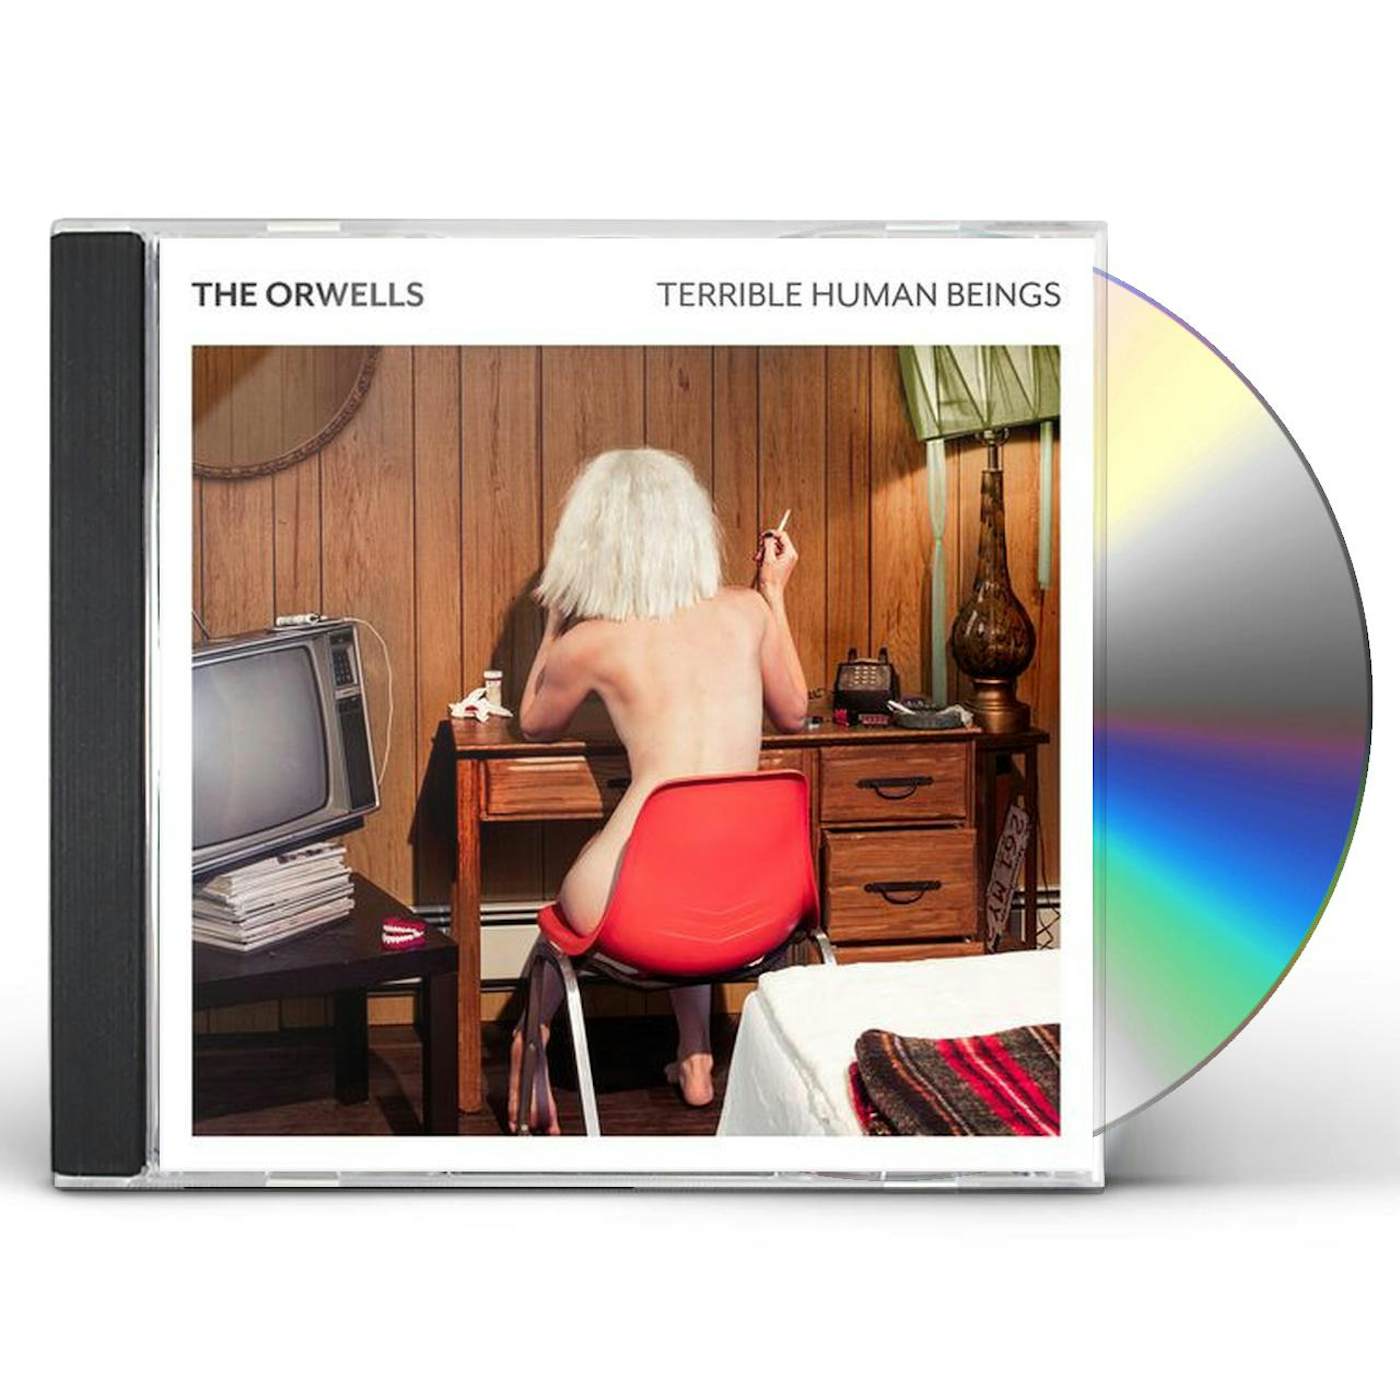 The Orwells TERRIBLE HUMAN BEINGS (SYEOR 2017 EXCLUSIVE) CD